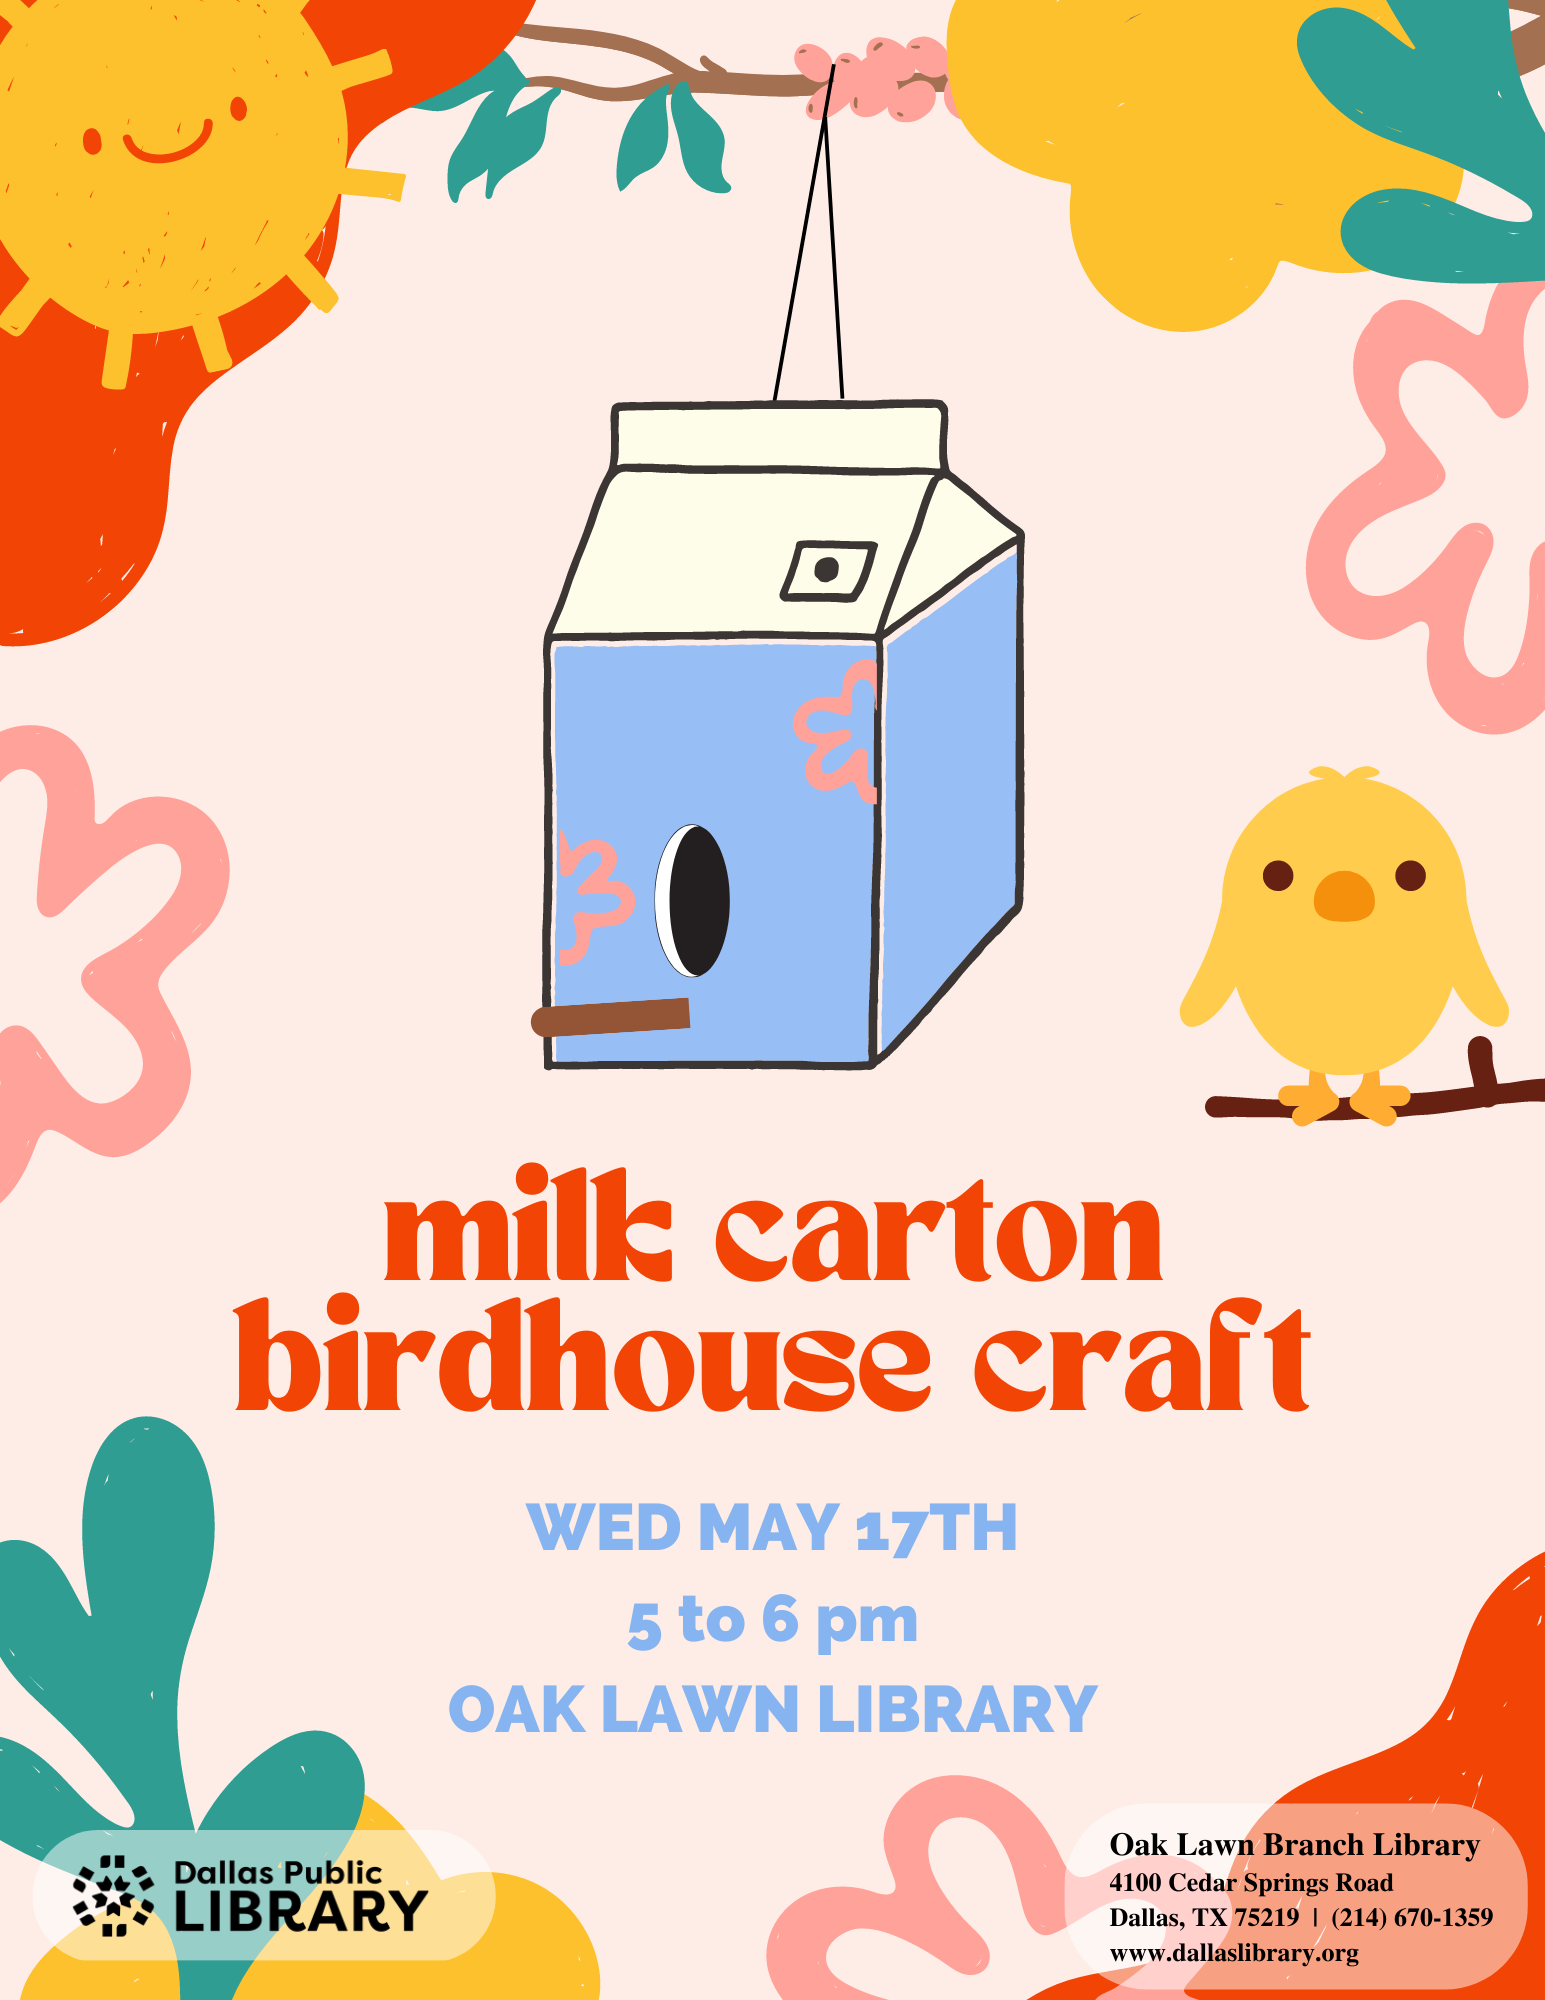 A flyer with a blue and white milk house with a hole and stick hanging on a tree. Around the border there are flowers and in the corner there is a sun. A bird sits on a branch next to the carton bird house. The text reads "milk carton birdhouse craft Wed May 17th 5 to 6 pm Oak Lawn Library".